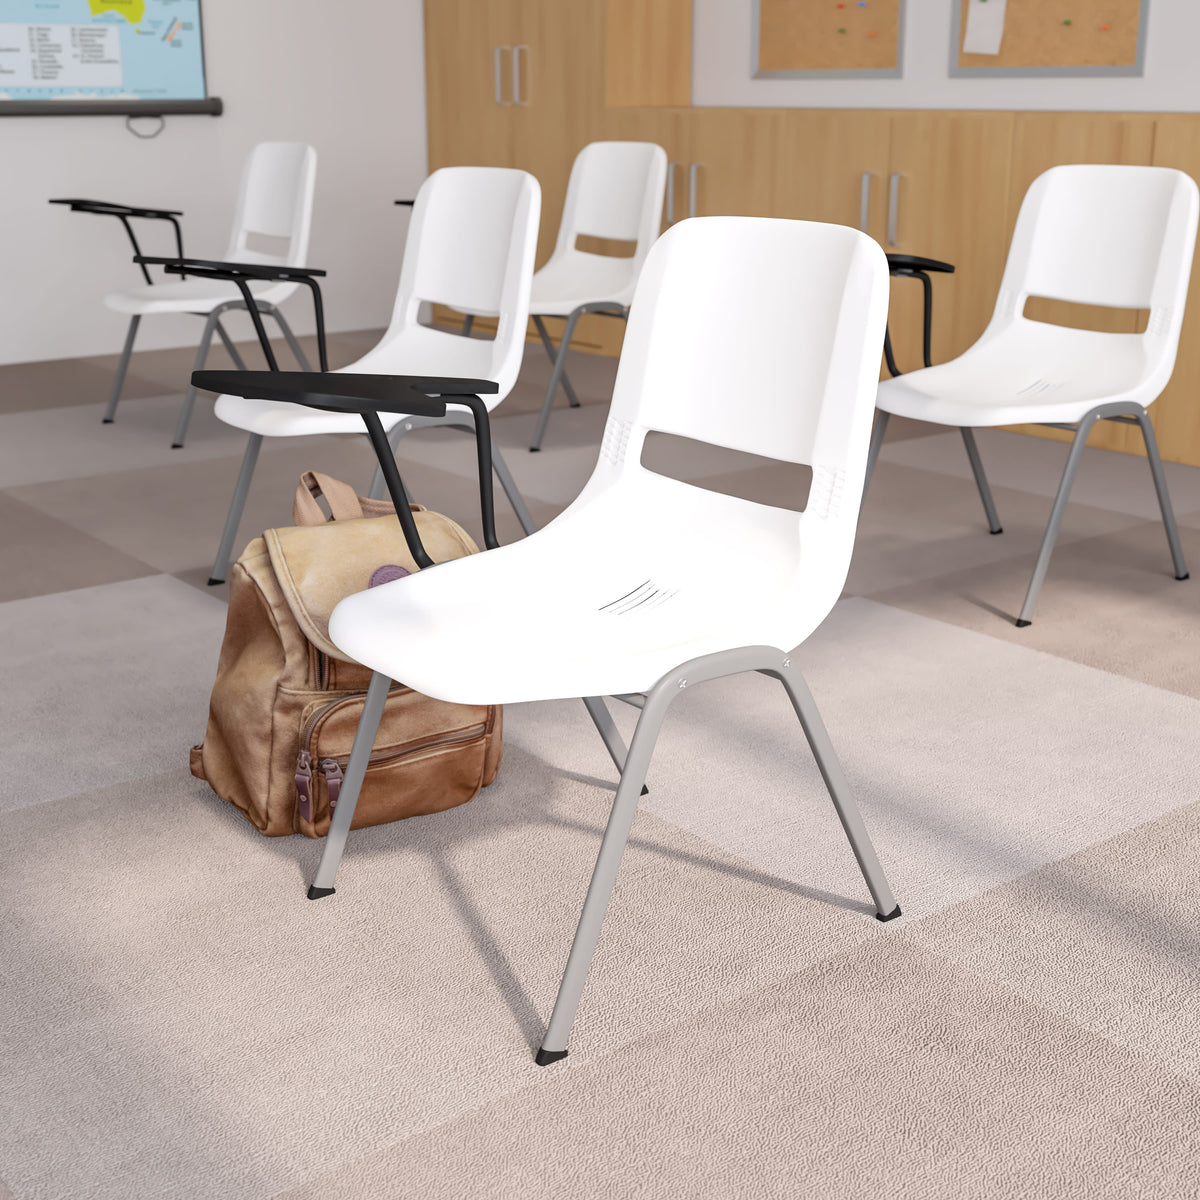 White |#| White Ergonomic Shell Chair with Right Handed Flip-Up Tablet - Tablet Arm Desk